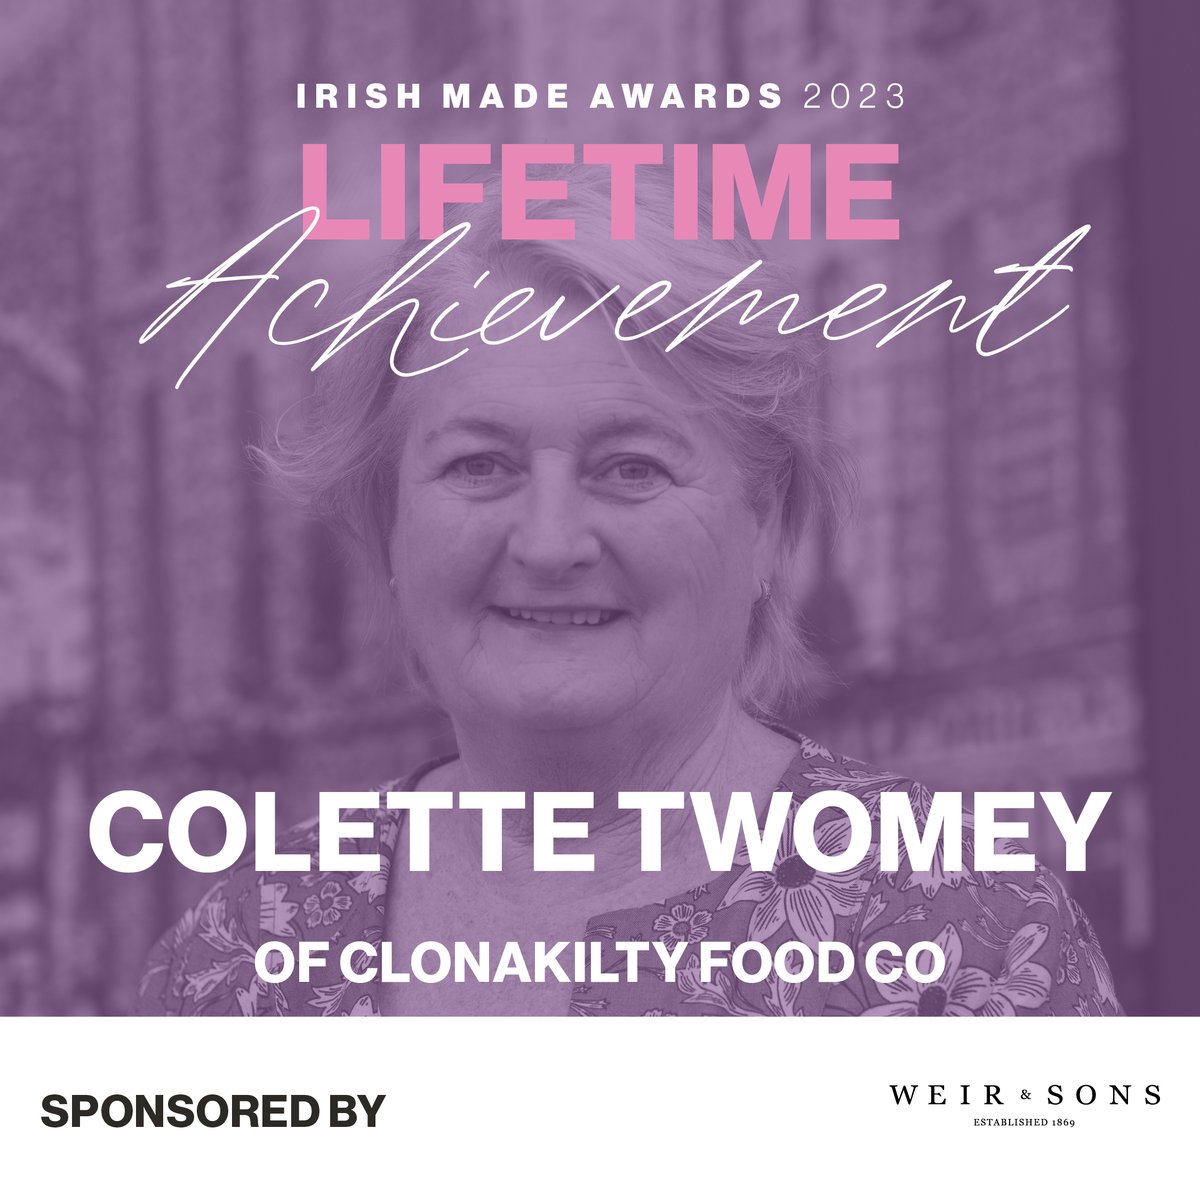 We are thrilled to announce Colette Twomey of @ClonakiltyBP as the winner of the Lifetime Achievement Award at the Irish Made Awards 2023, sponsored by @WeirandSons

#irishmadeawards2023